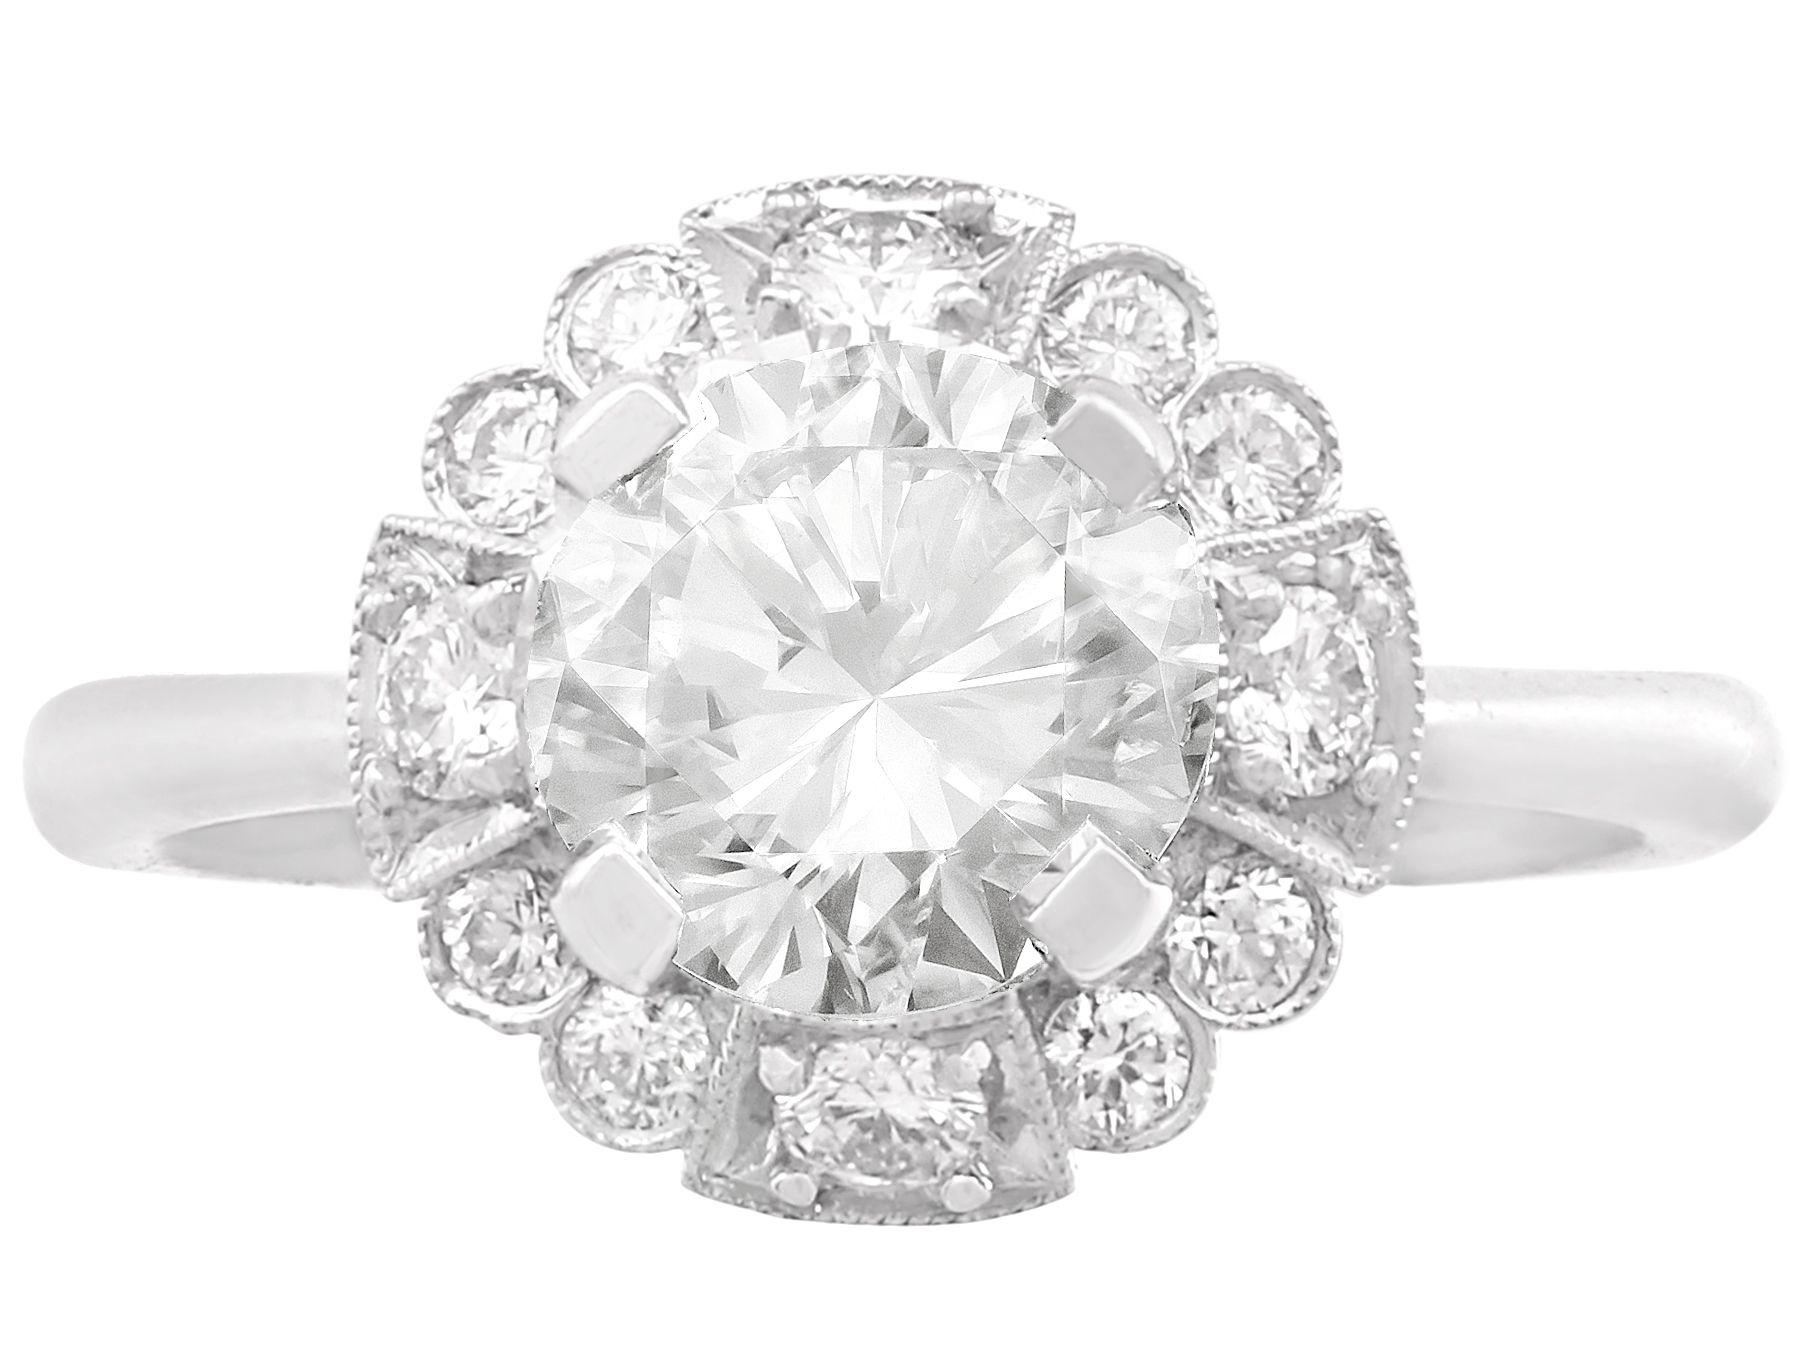 1950s engagement ring styles